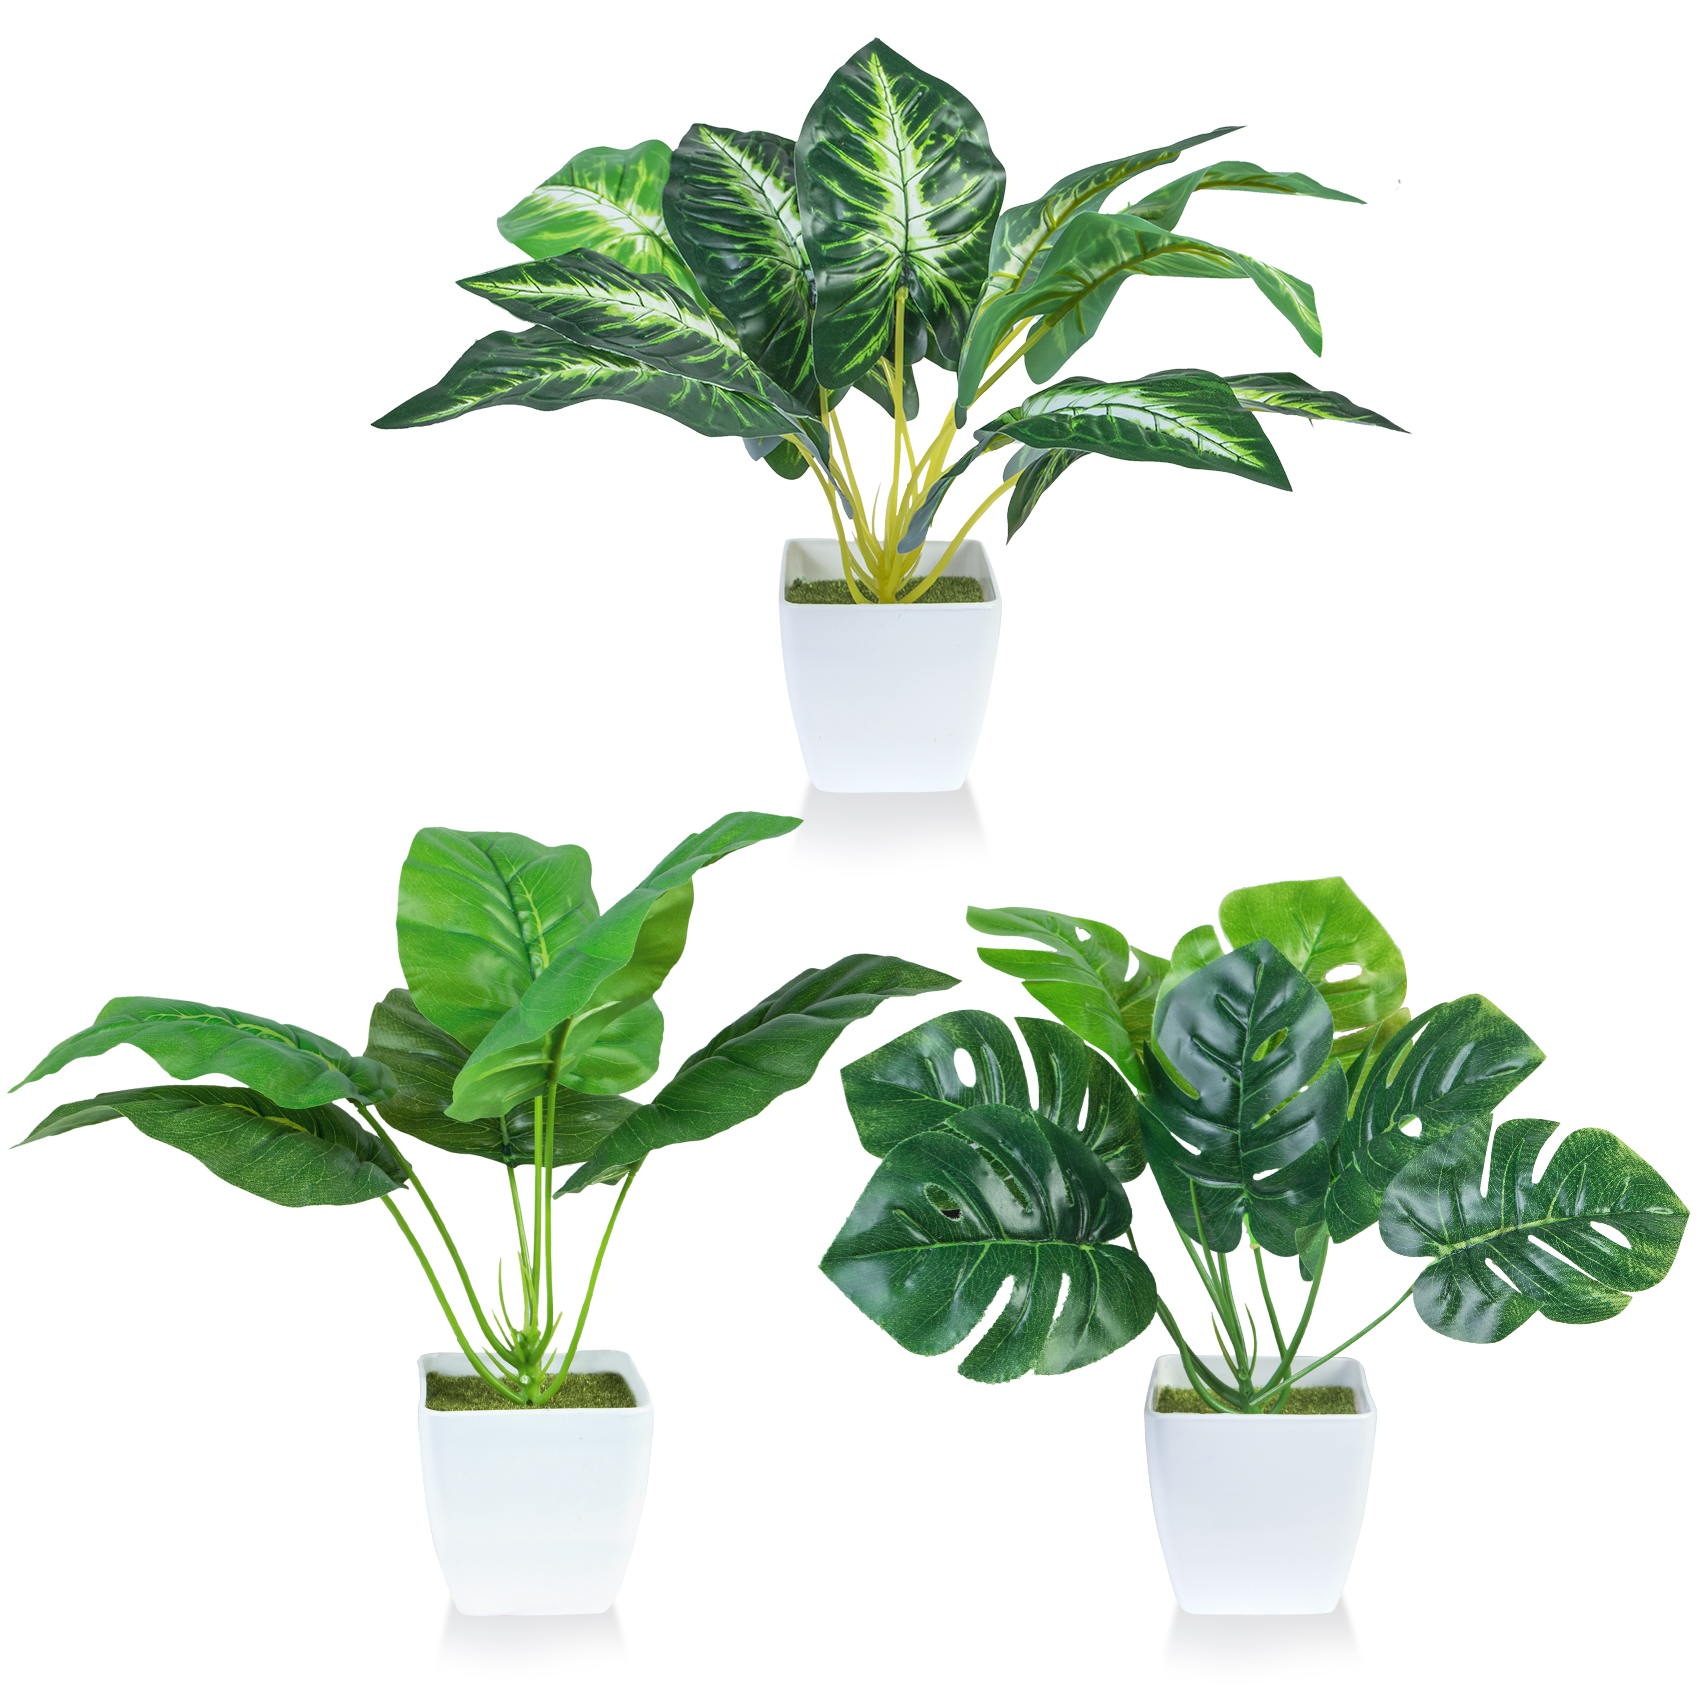 Ouddy Decor 3 Pack Small Fake Plants Artificial Mini Potted Plants Faux Greenery Tabletop Artificial Plants for Desk Shelf Bathroom Office Home Indoor Decor - Click Image to Close